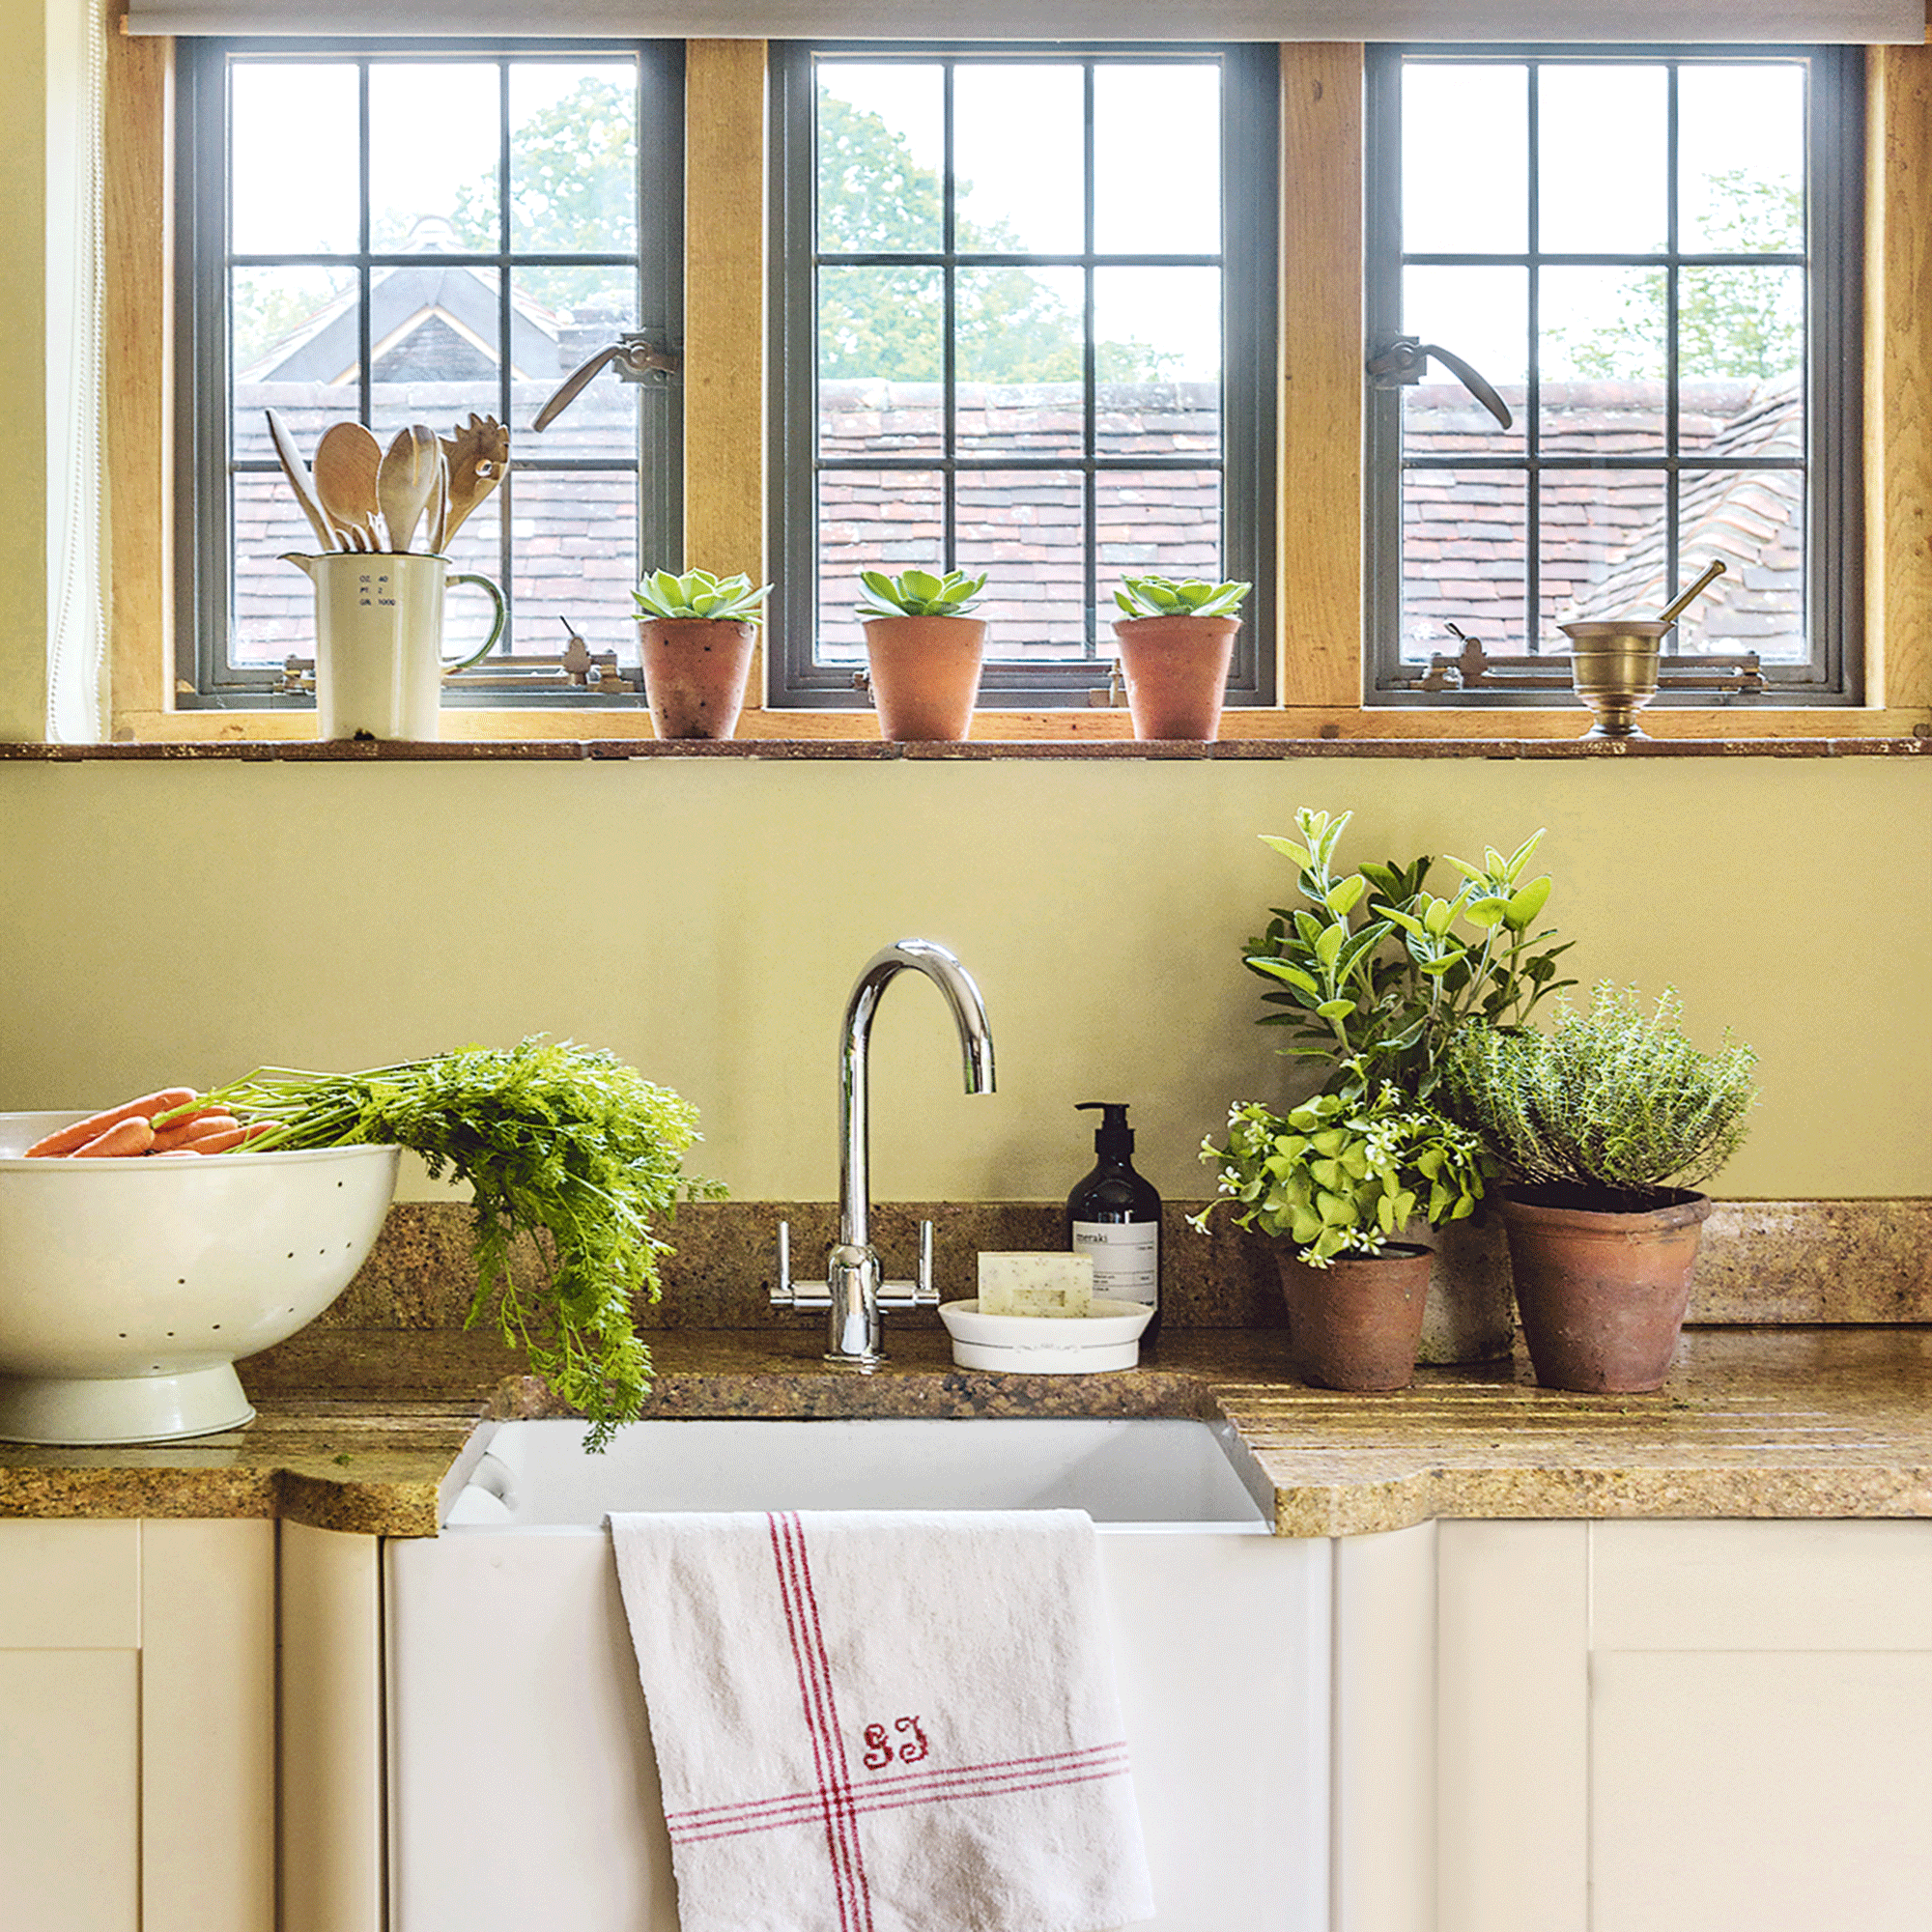 Sink in yellow kitchen with herbs in plant pots